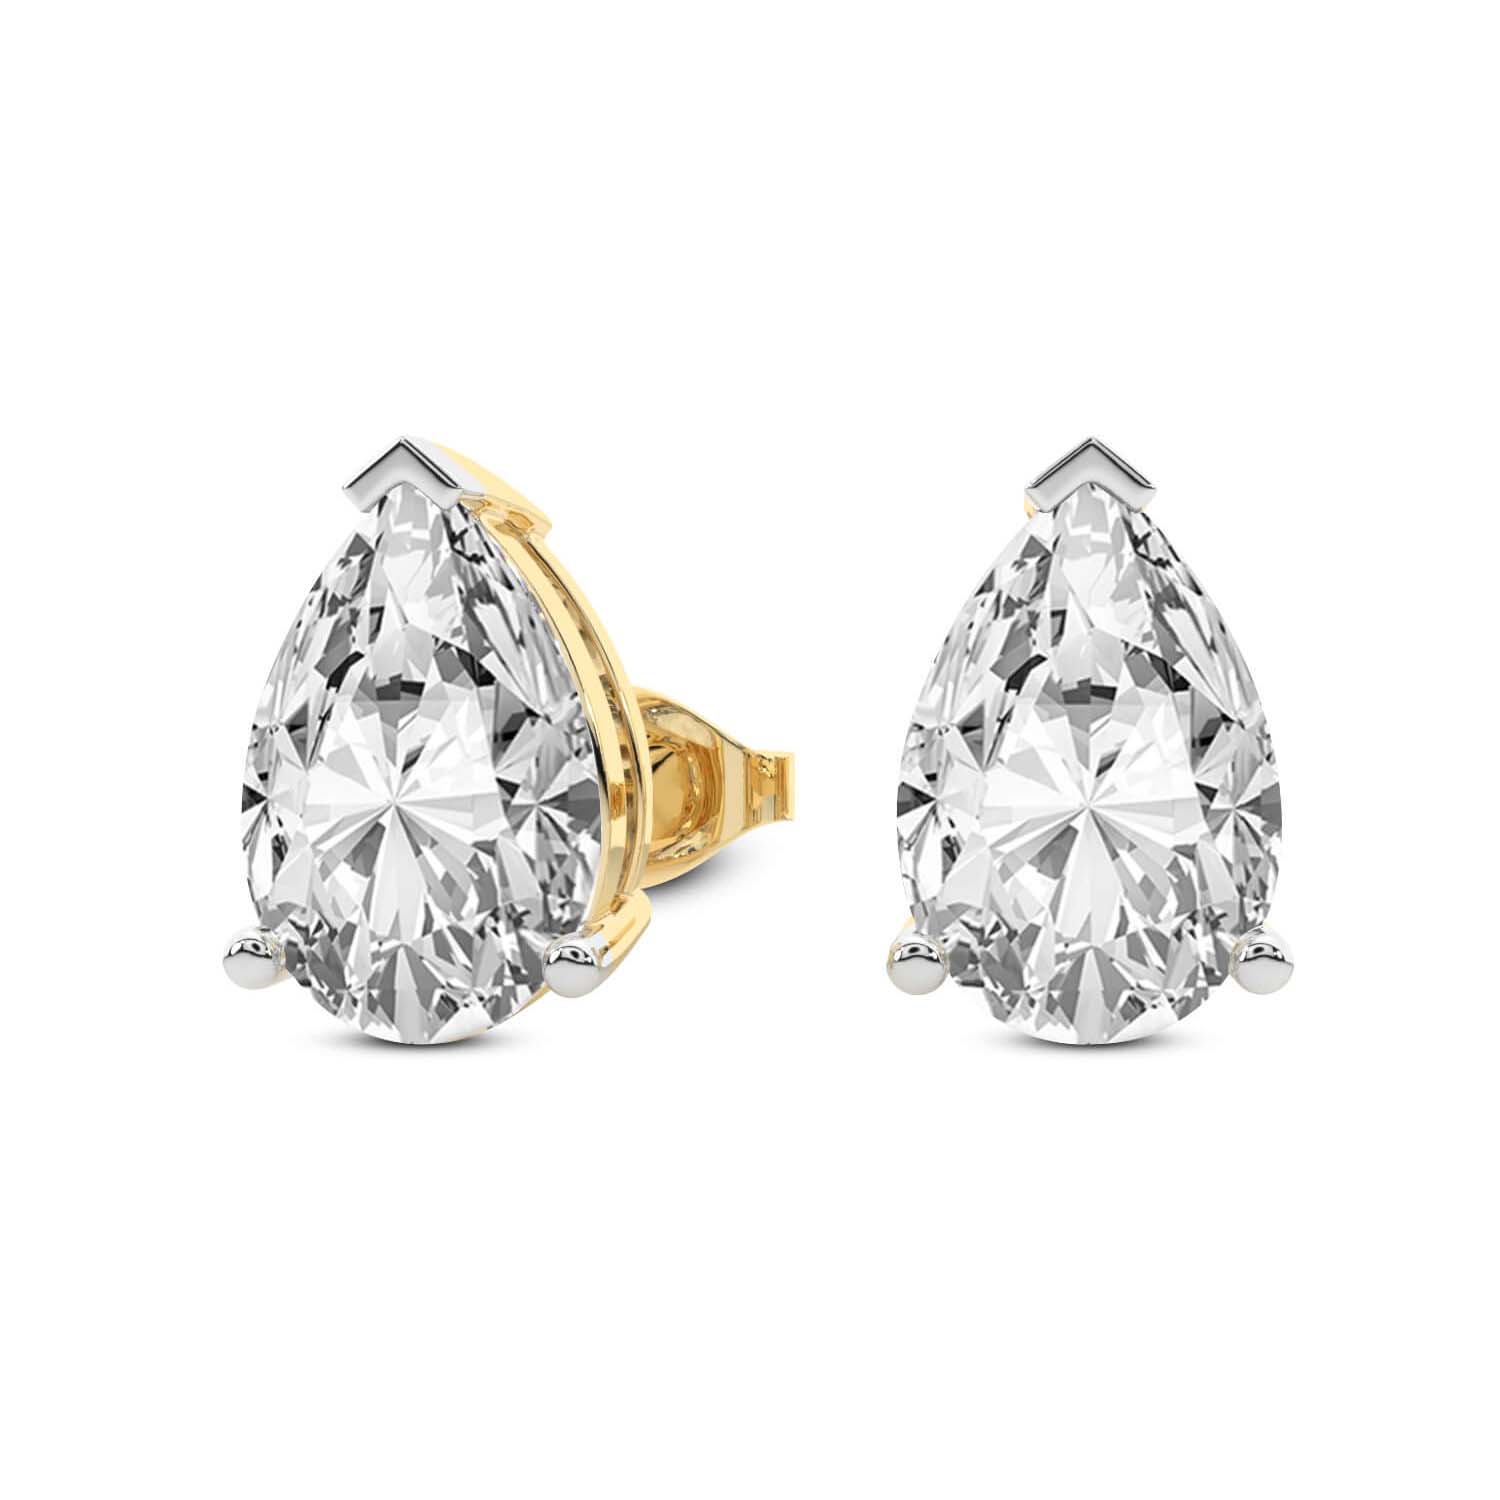 3 Prong Pear Lab Diamond Stud Earrings yellow gold earring, small right view